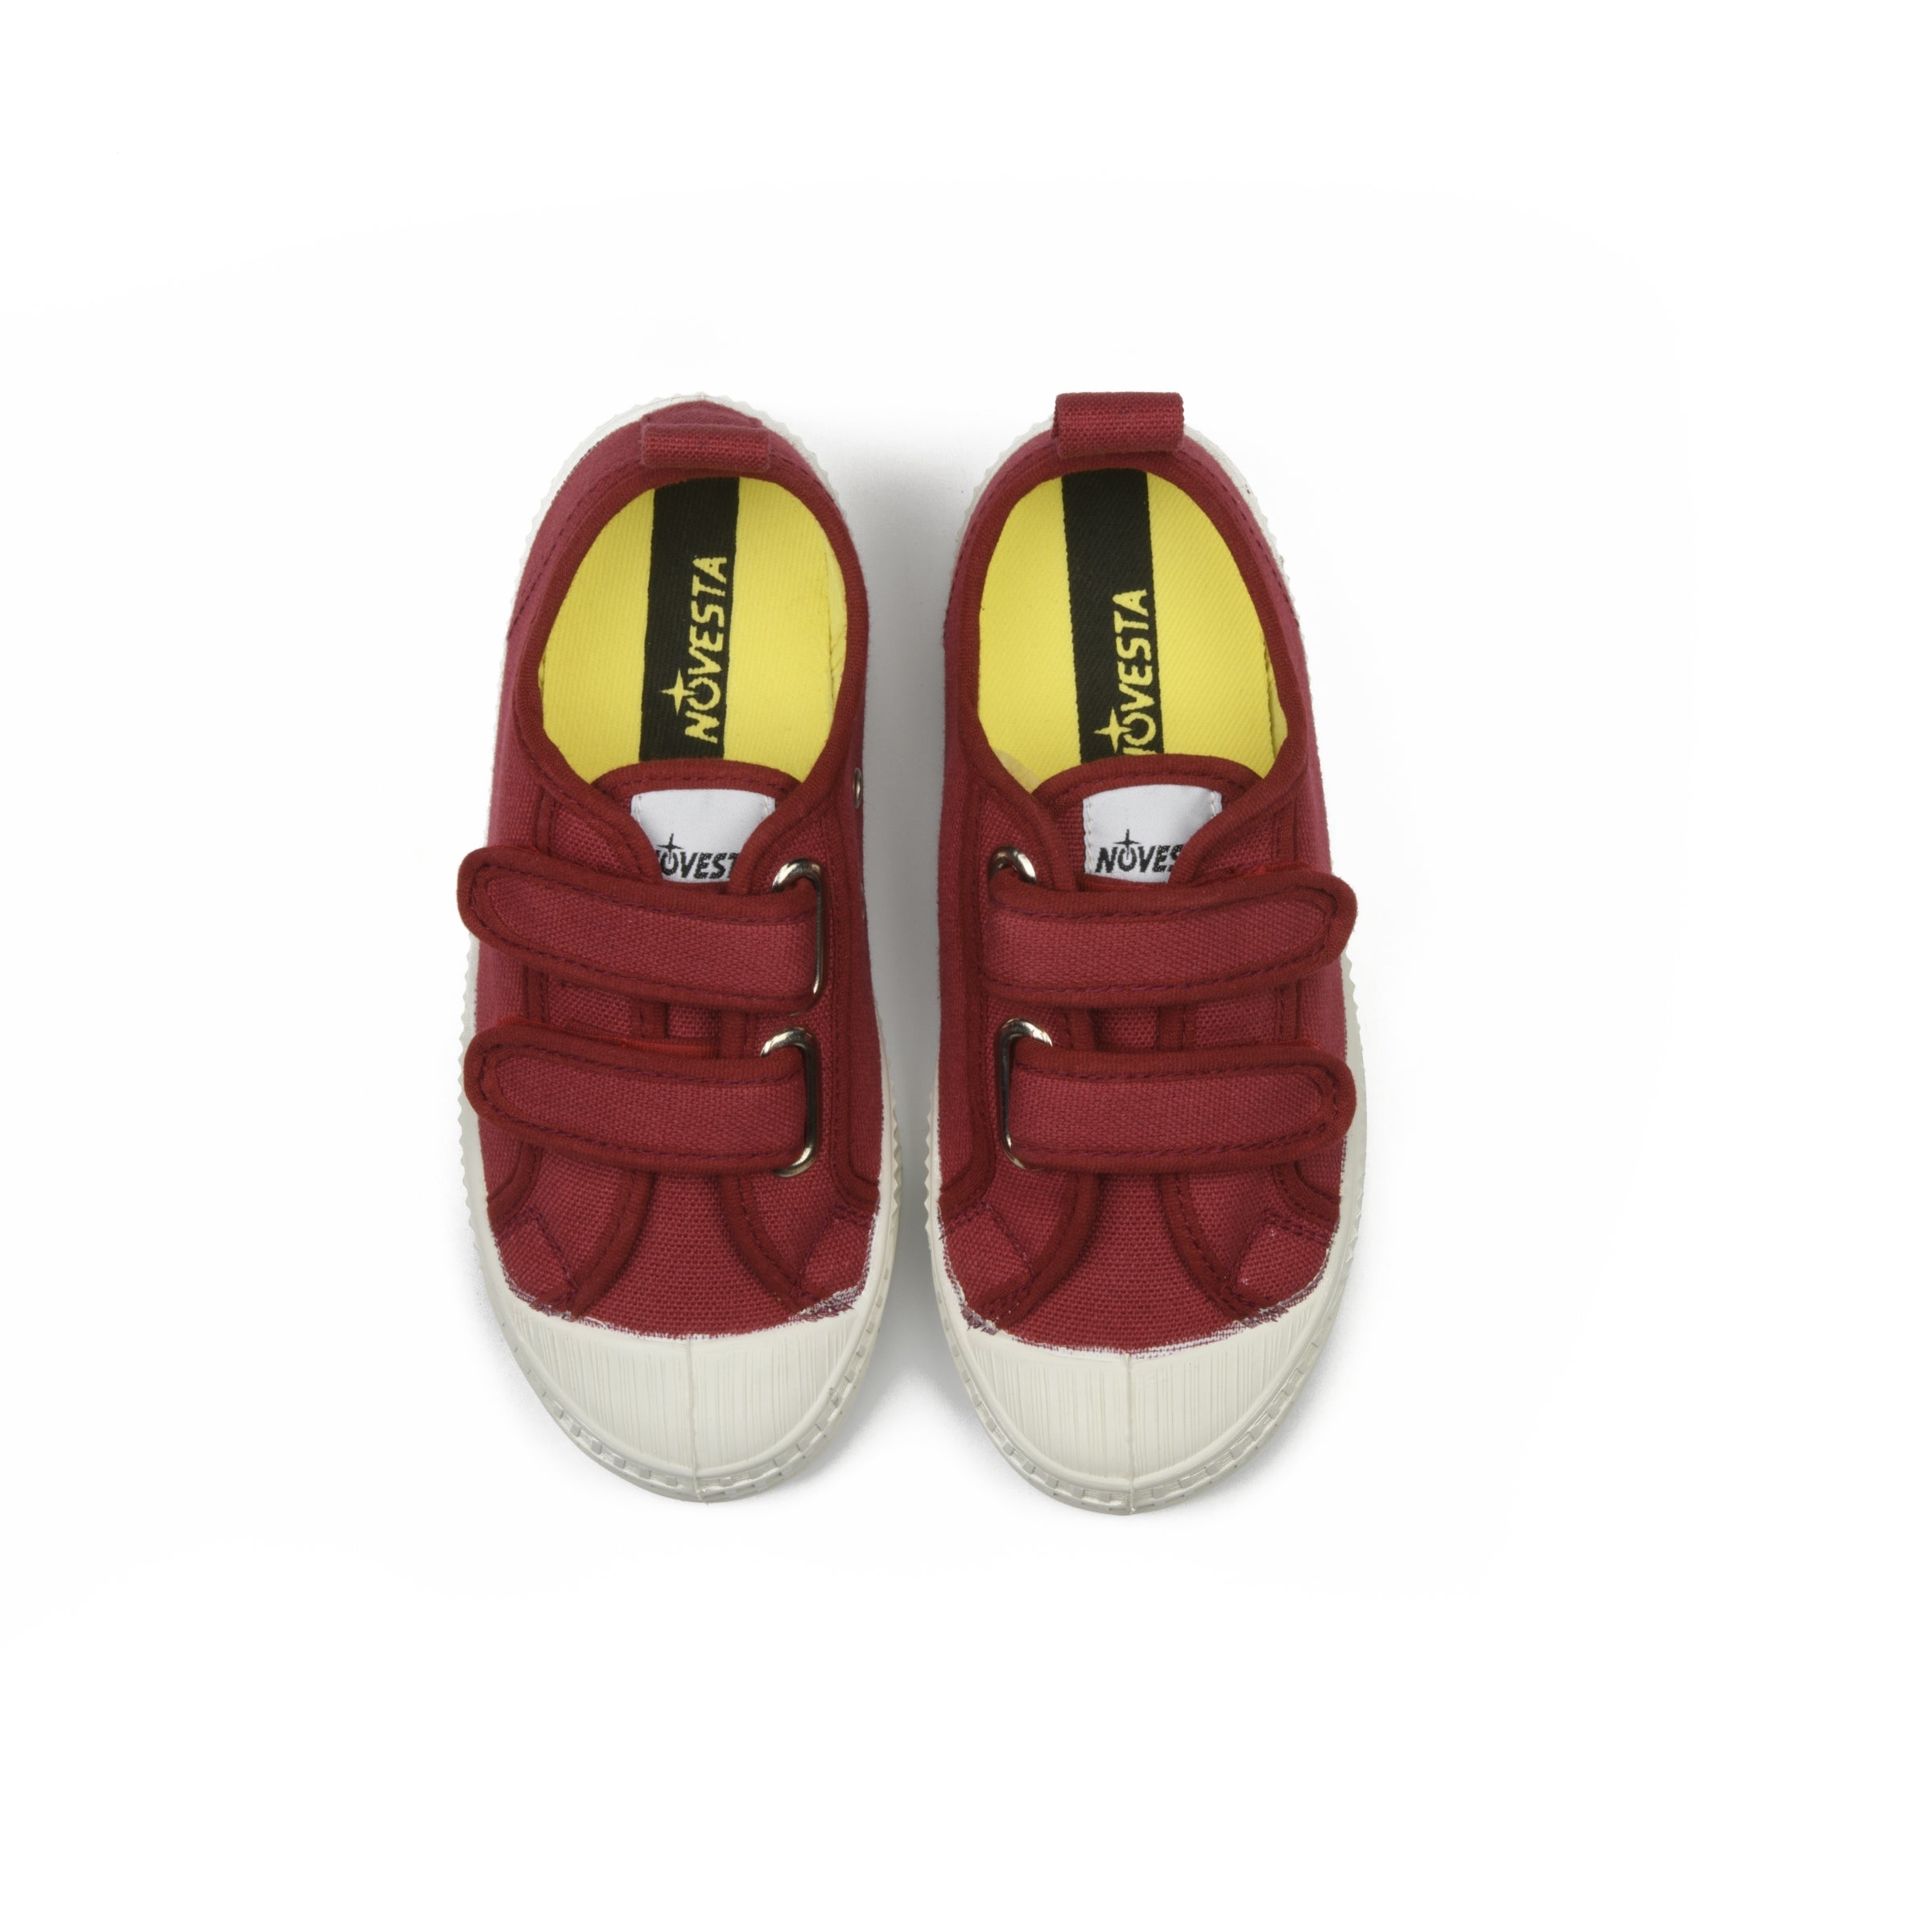 Boys & Girls Red Velcro Shoes